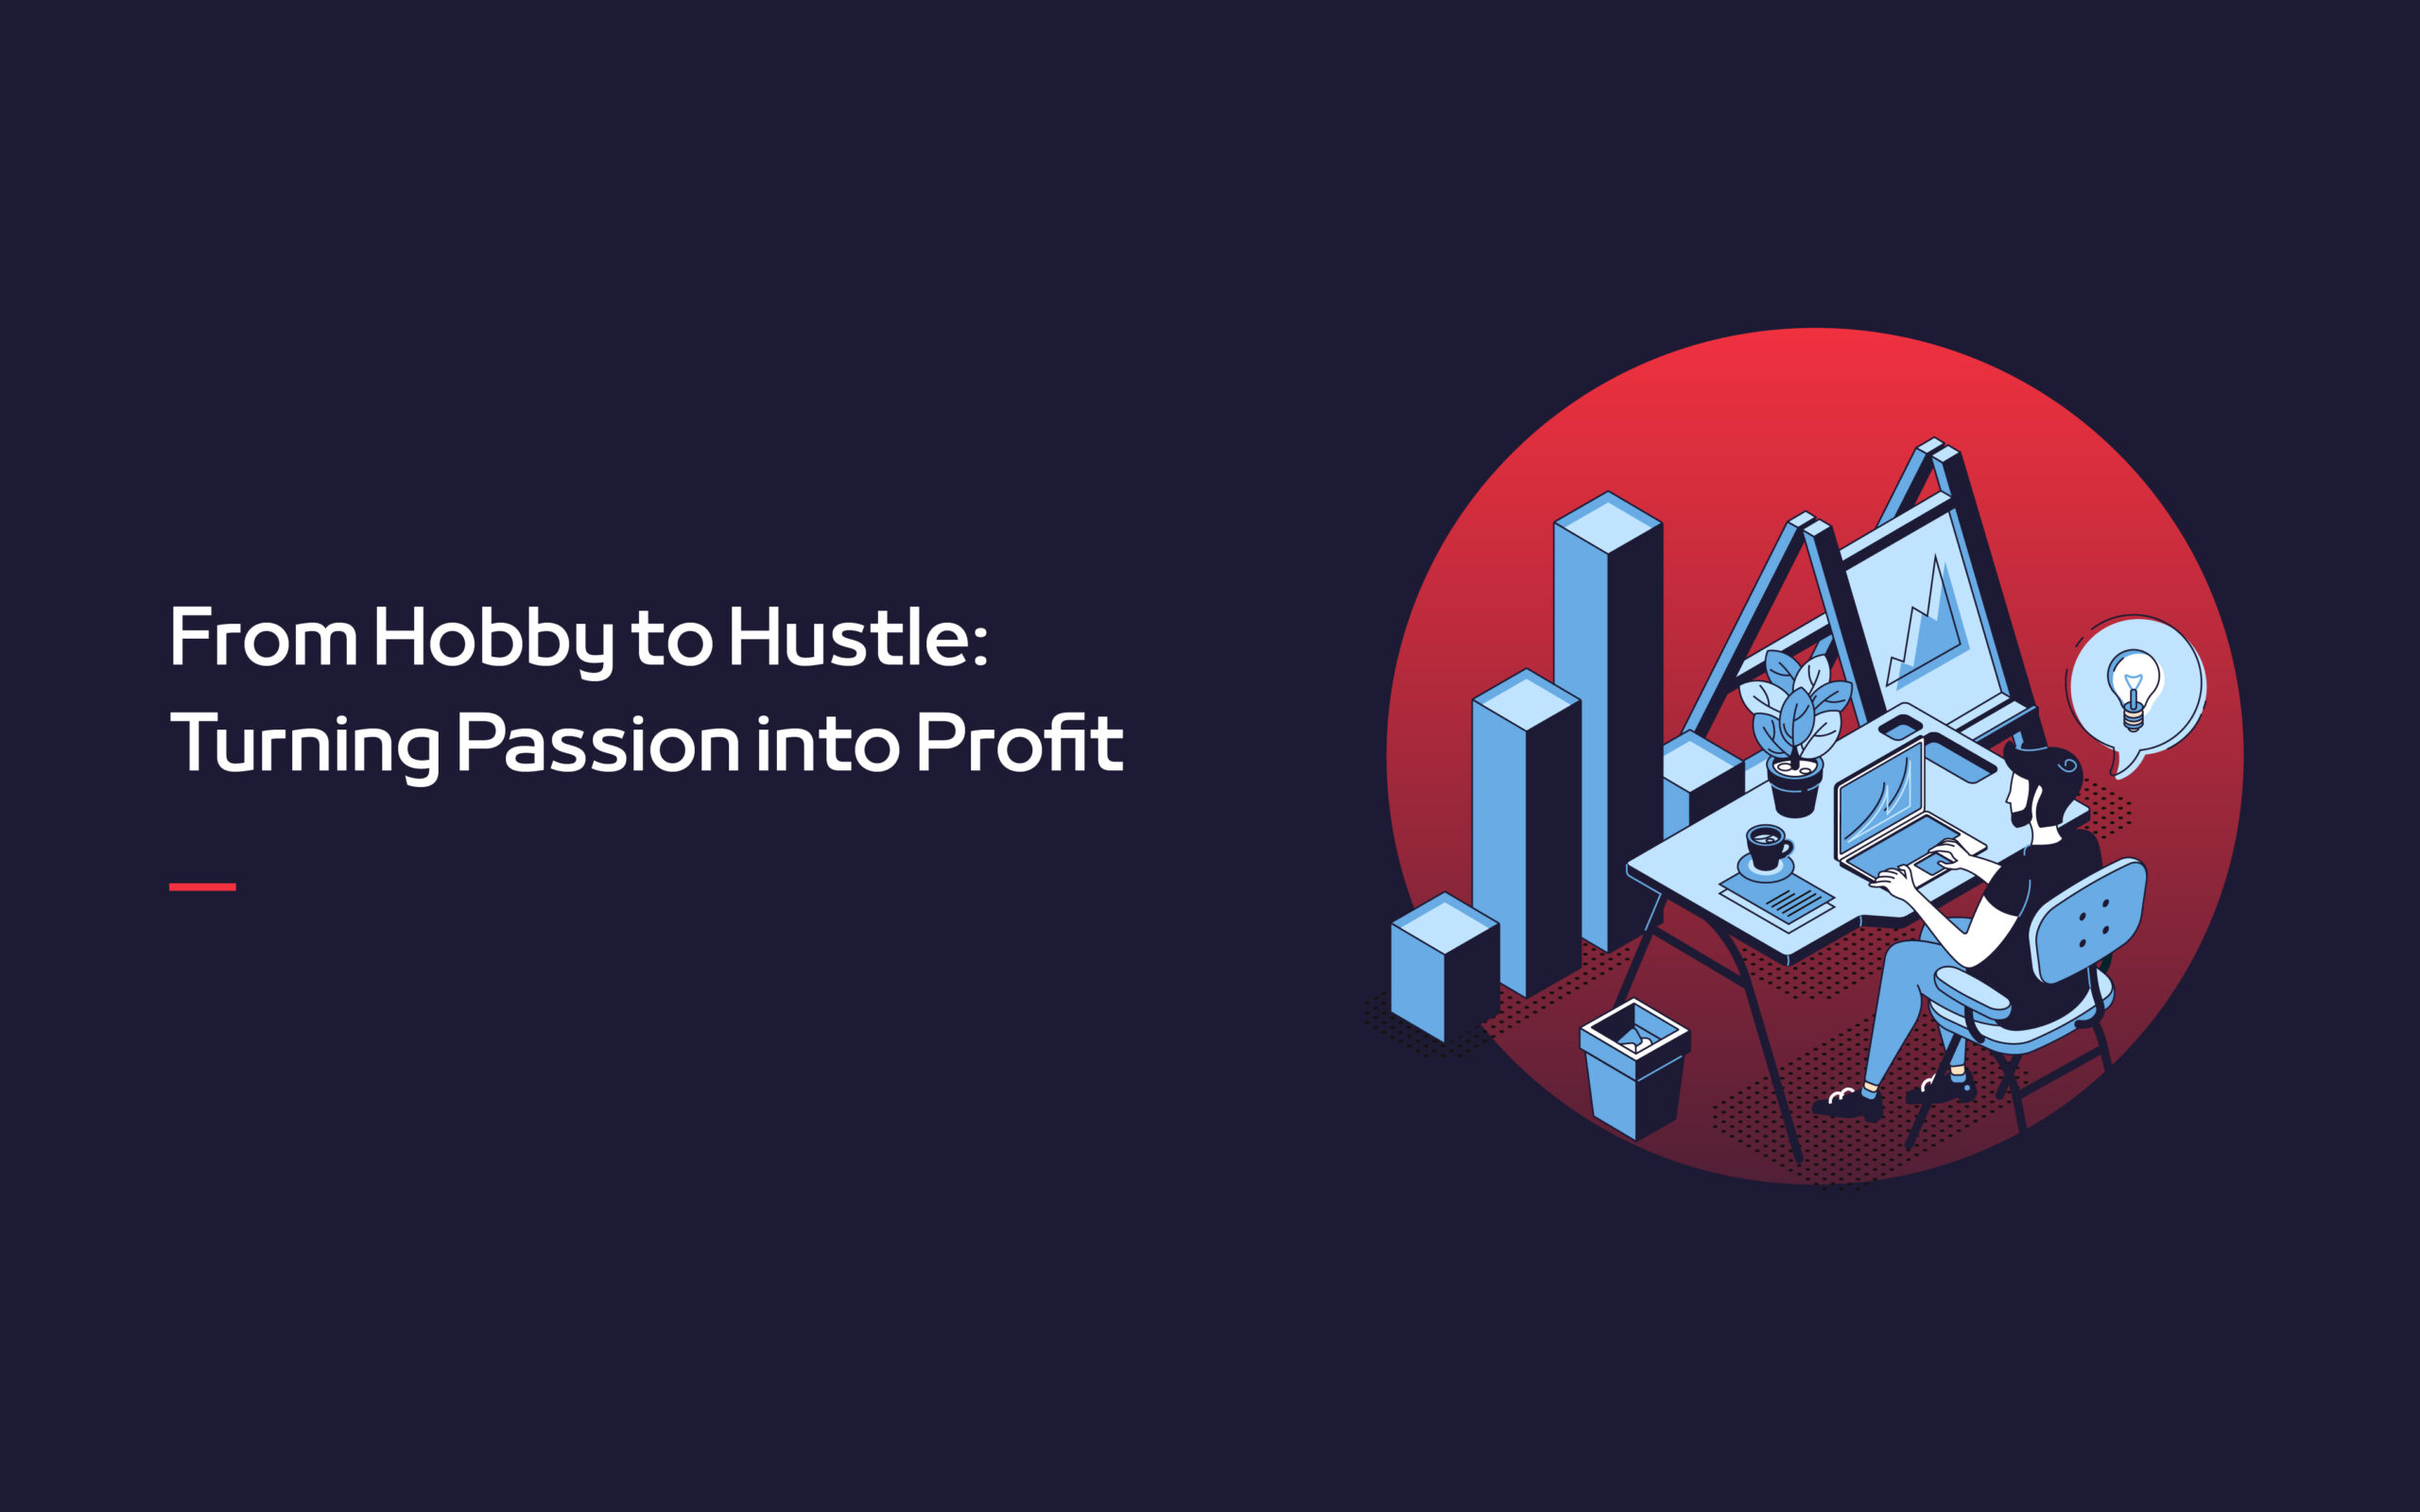 From Hobby to Hustle: Turning Passion into Profit